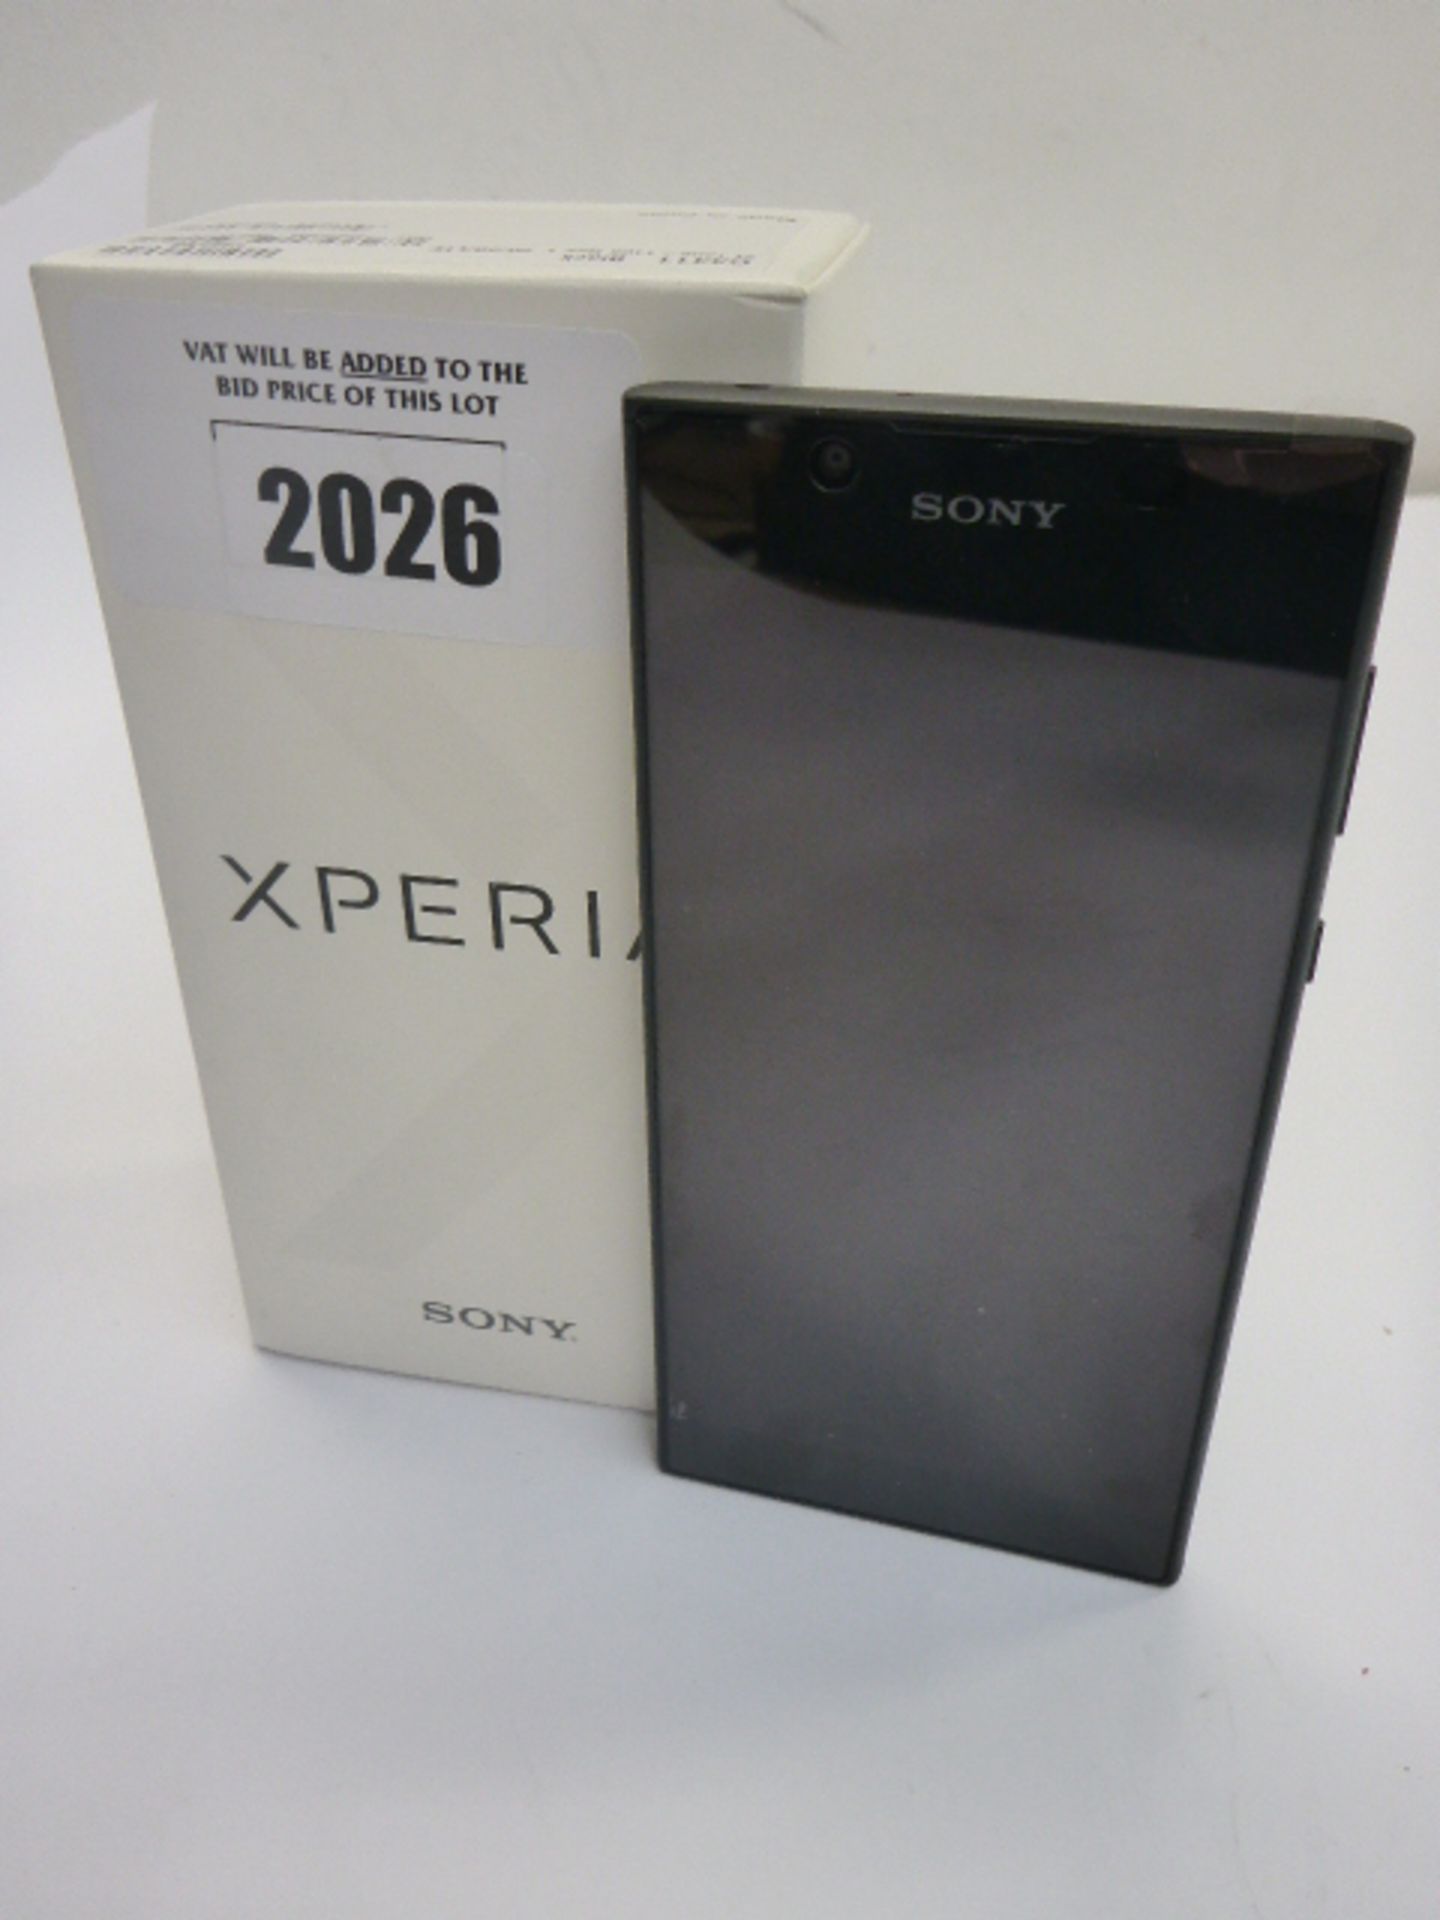 Sony Xperia L1 android mobile, 16GB storage with box.